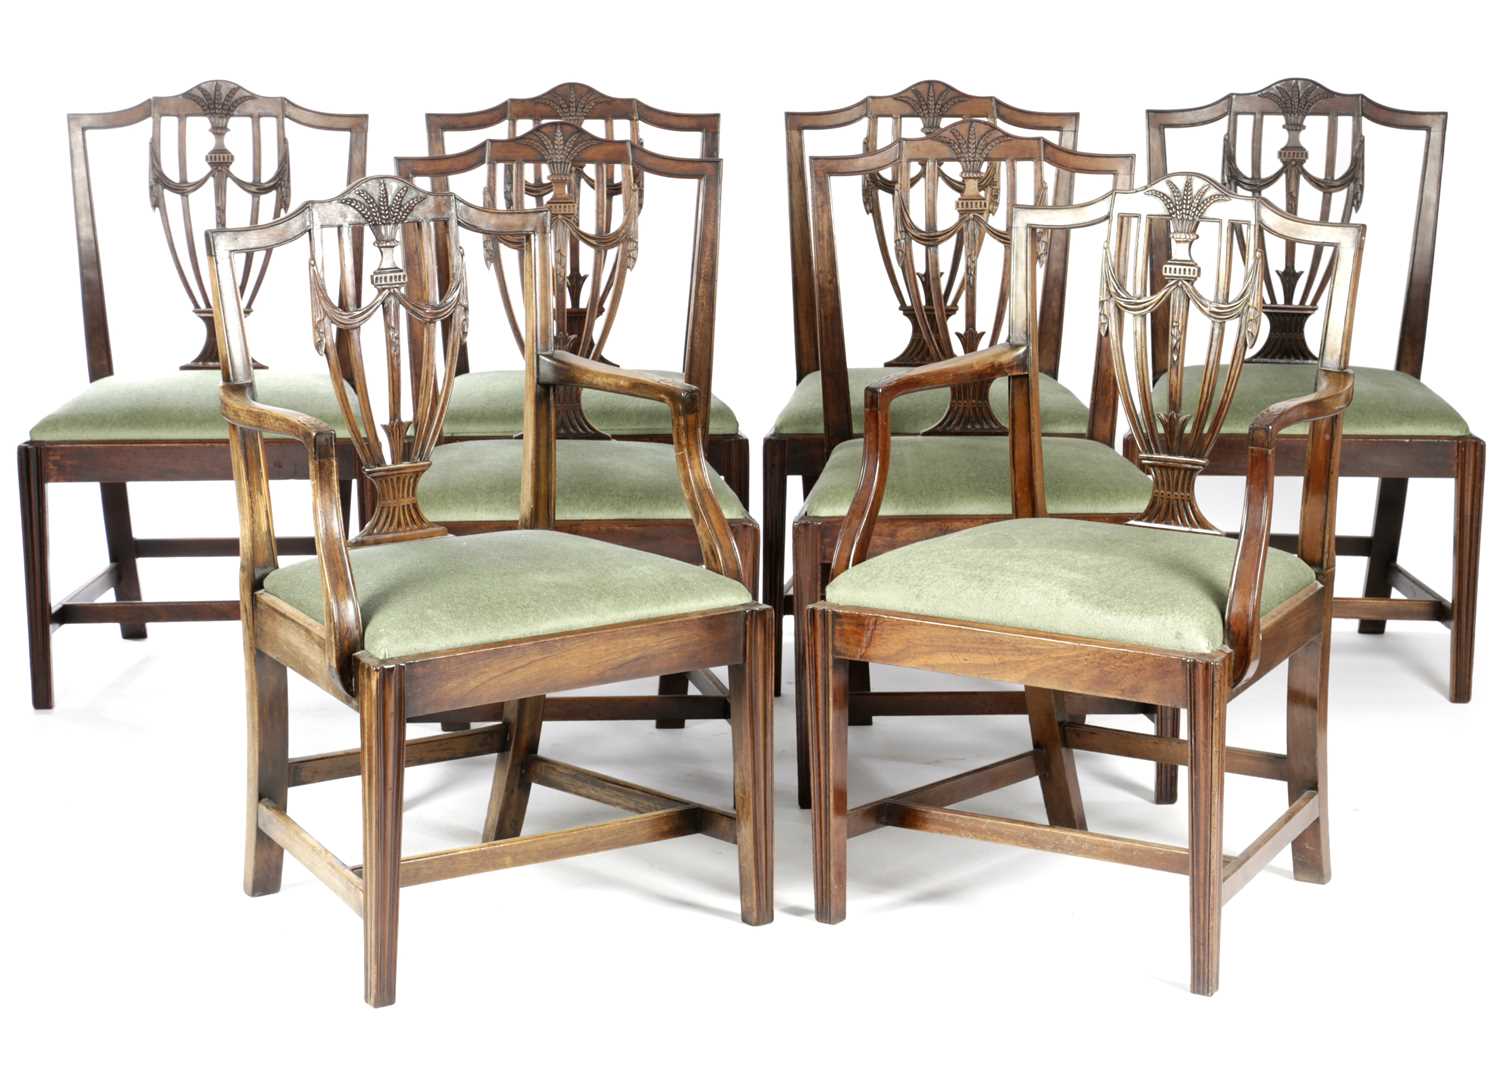 A SET OF EIGHT GEORGE III MAHOGANY DINING CHAIRS IN HEPPLEWHITE STYLE, LATE 18TH CENTURY each with a